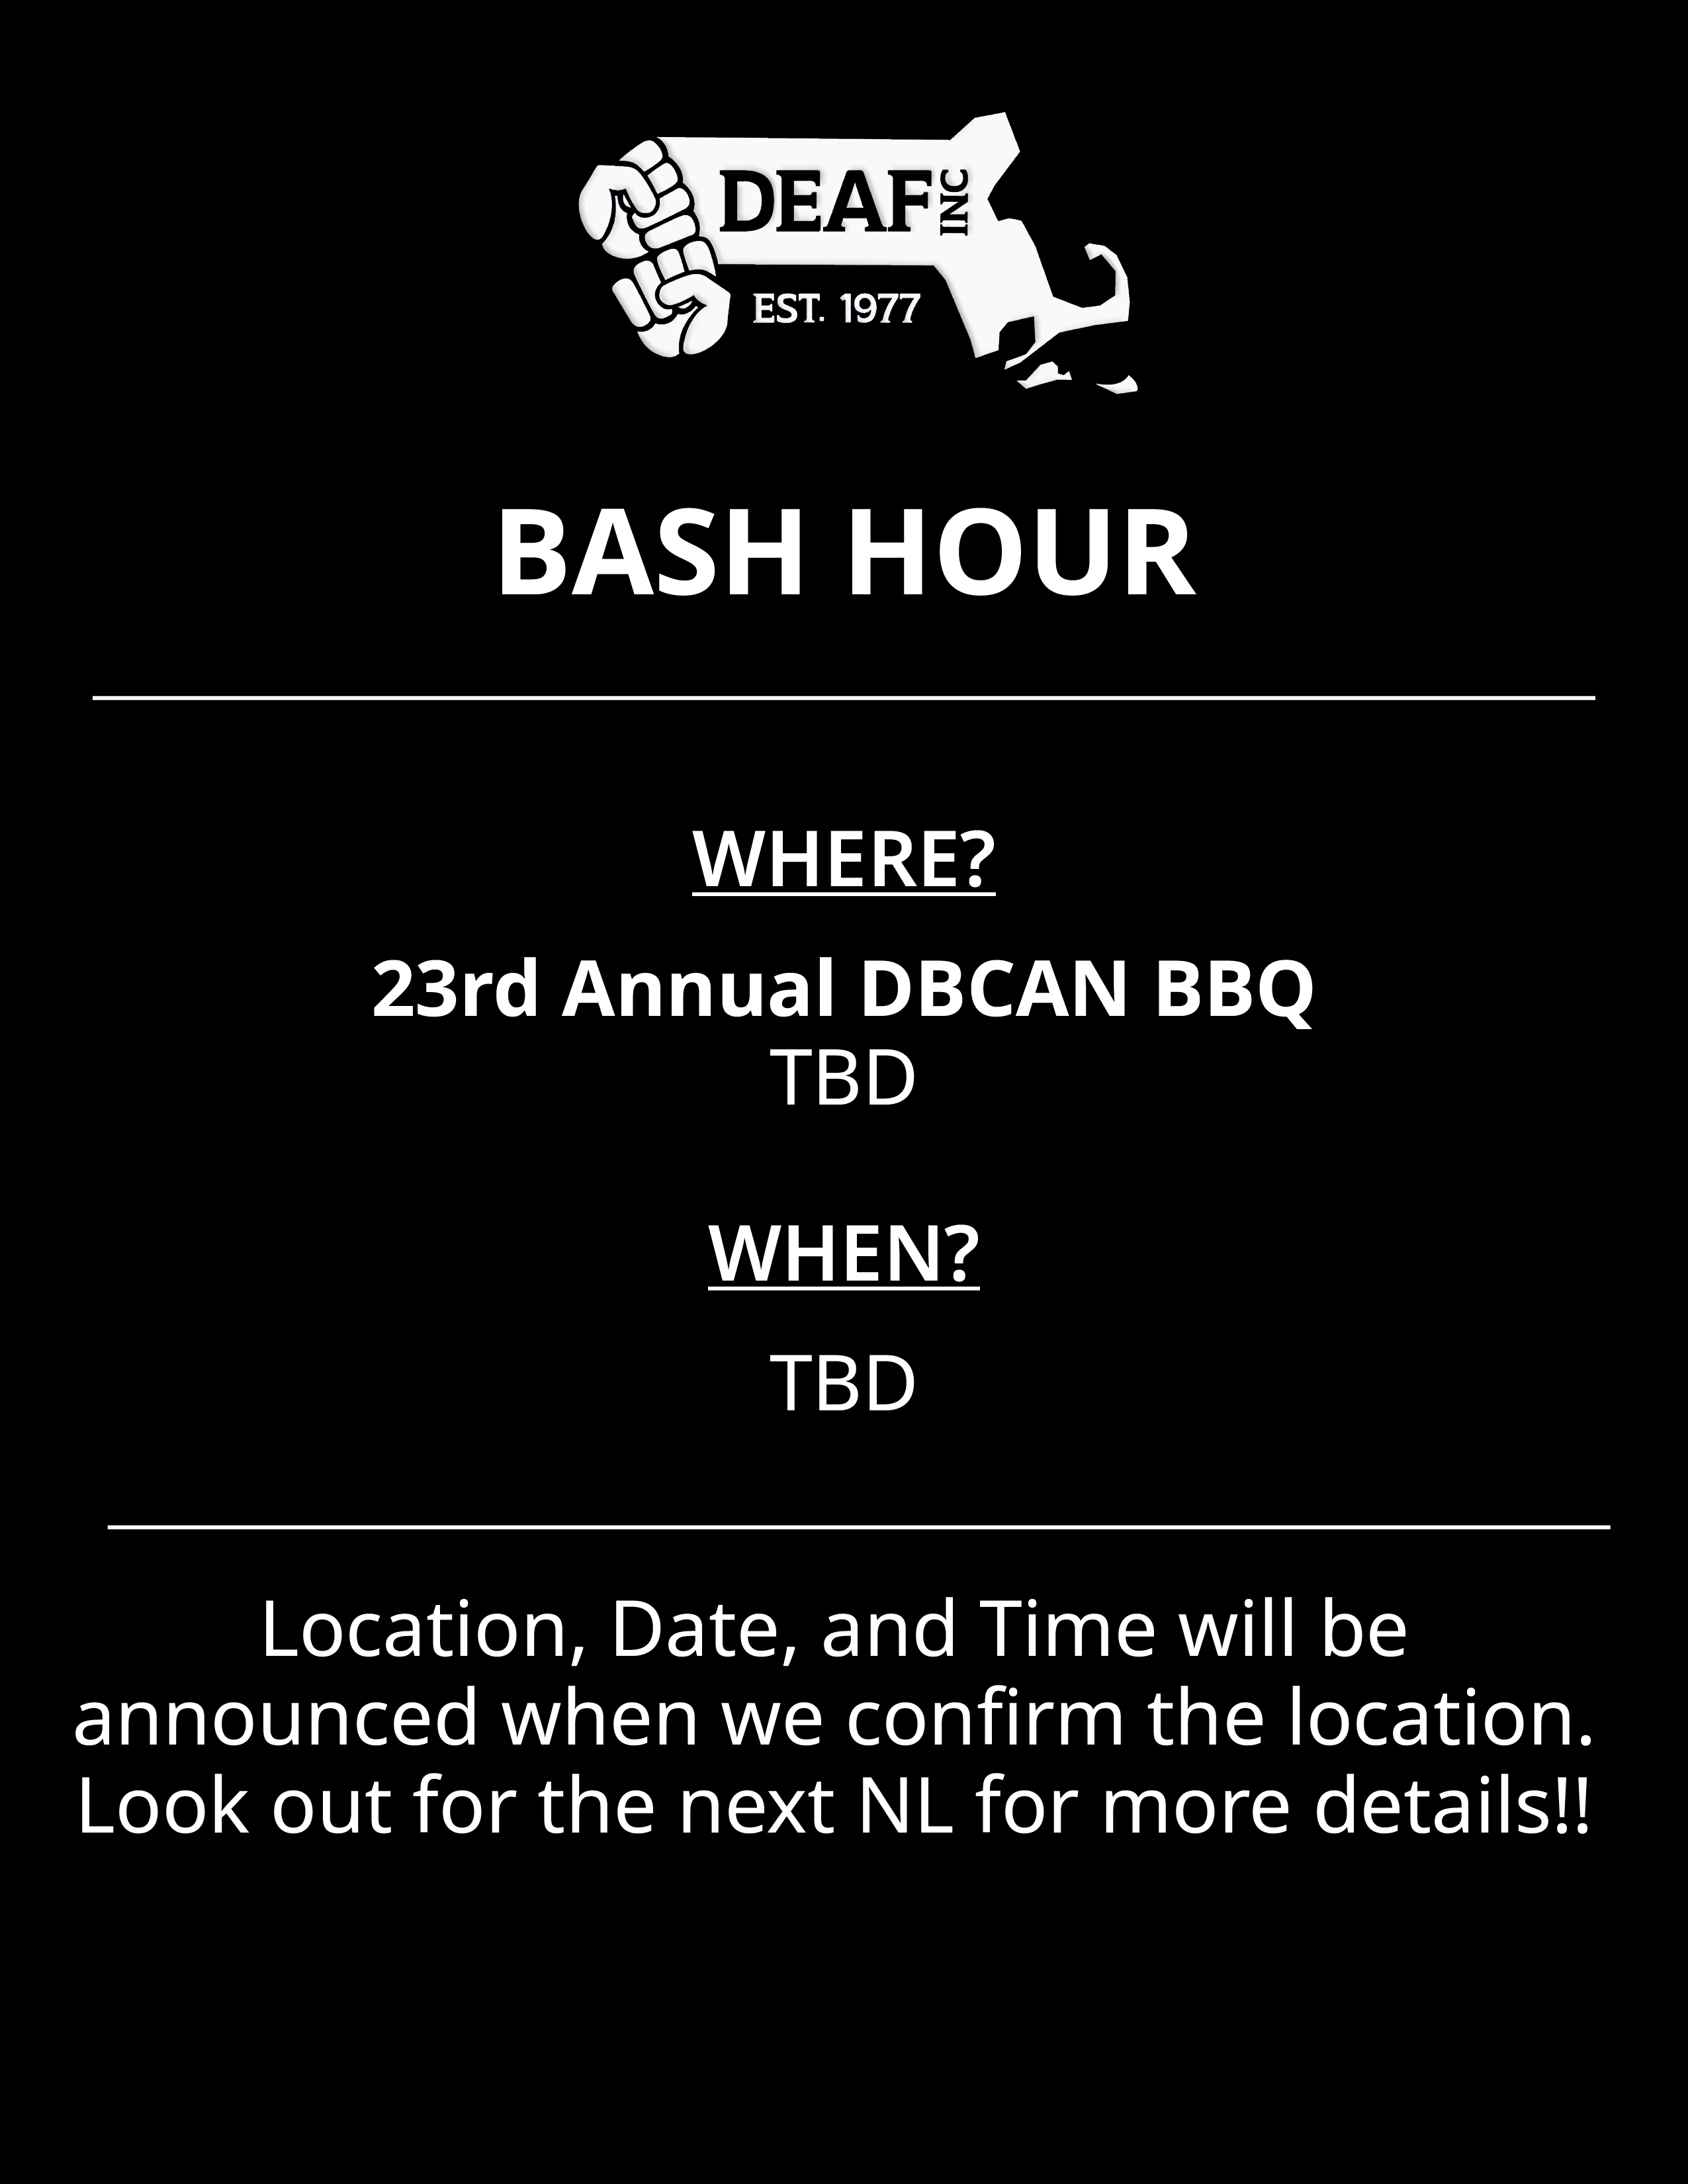 Image Description: Black and white BASH HOUR flyer with white DEAF, Inc. logo at the top. WHERE? 23rd Annual DBCAN BBQ. TBD. WHEN? TBD. Location, Date, and Time will be announced when we confirm the location. Look out for the next NL for more details!!